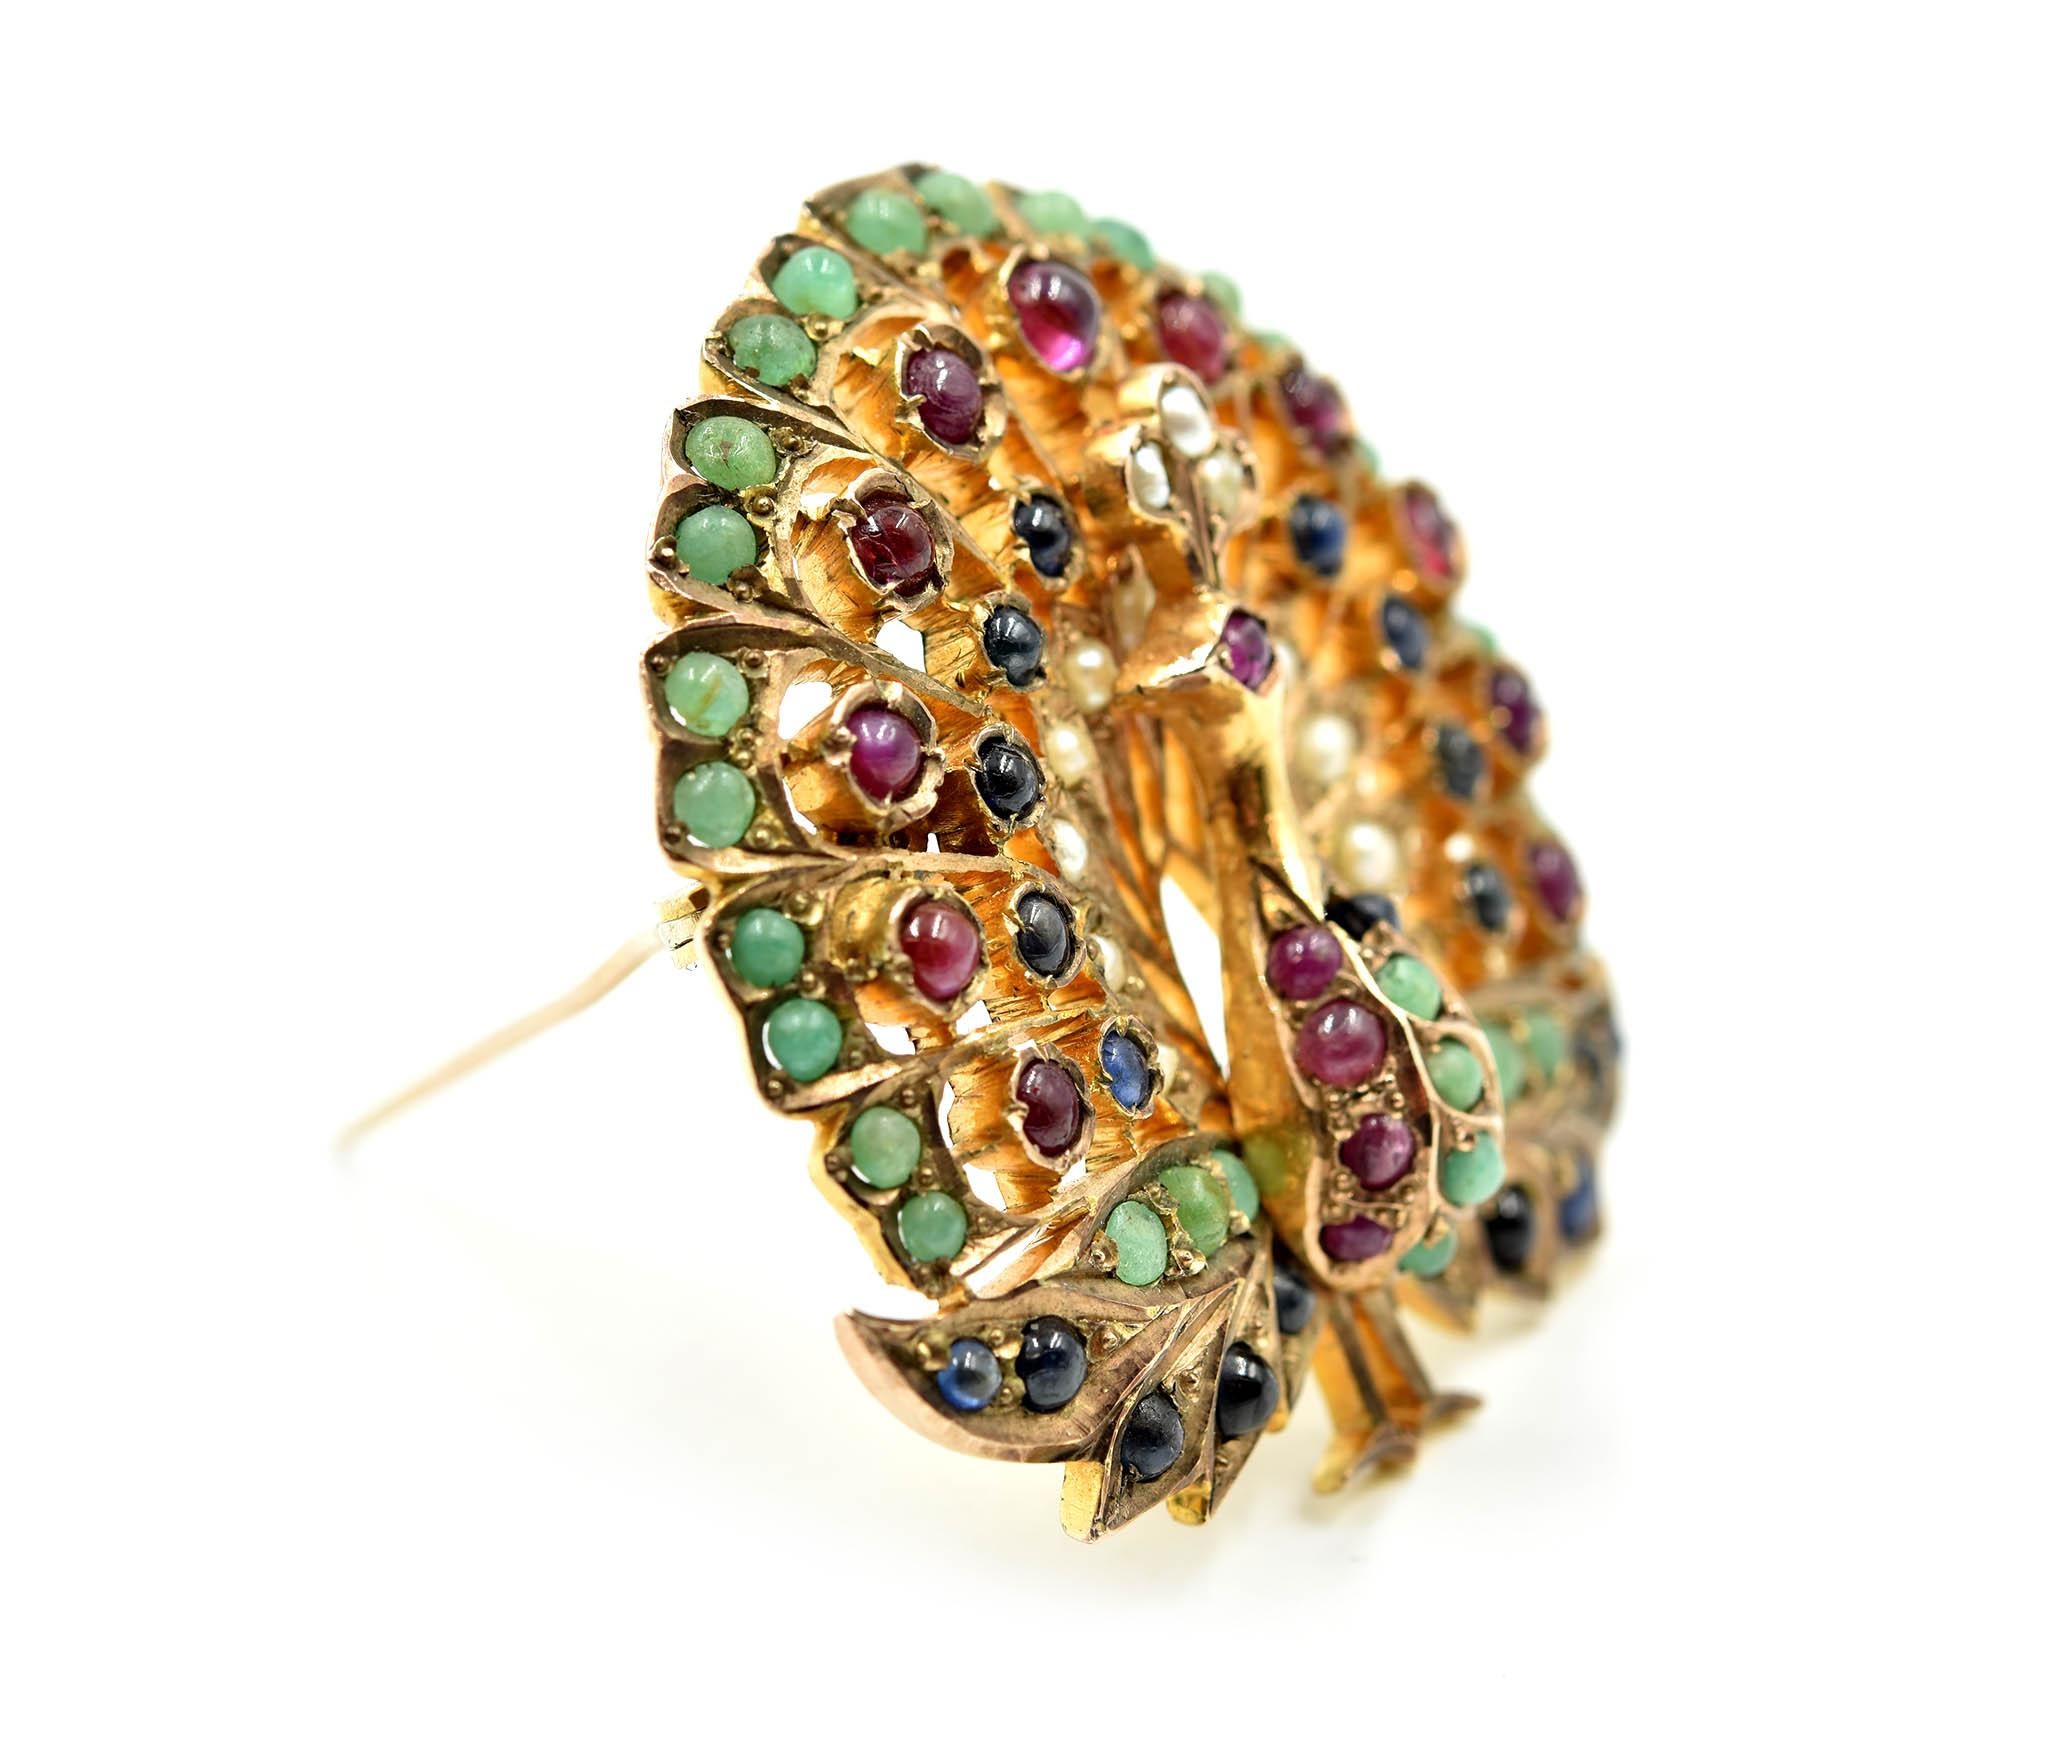 Designer: custom design
Material: 9k yellow gold
Gemstones: emerald, rubies and sapphire unfaceted round stones
Dimensions: pin measures 1 ¾ inches long and 2 inches wide
Weight: 27.03 grams
